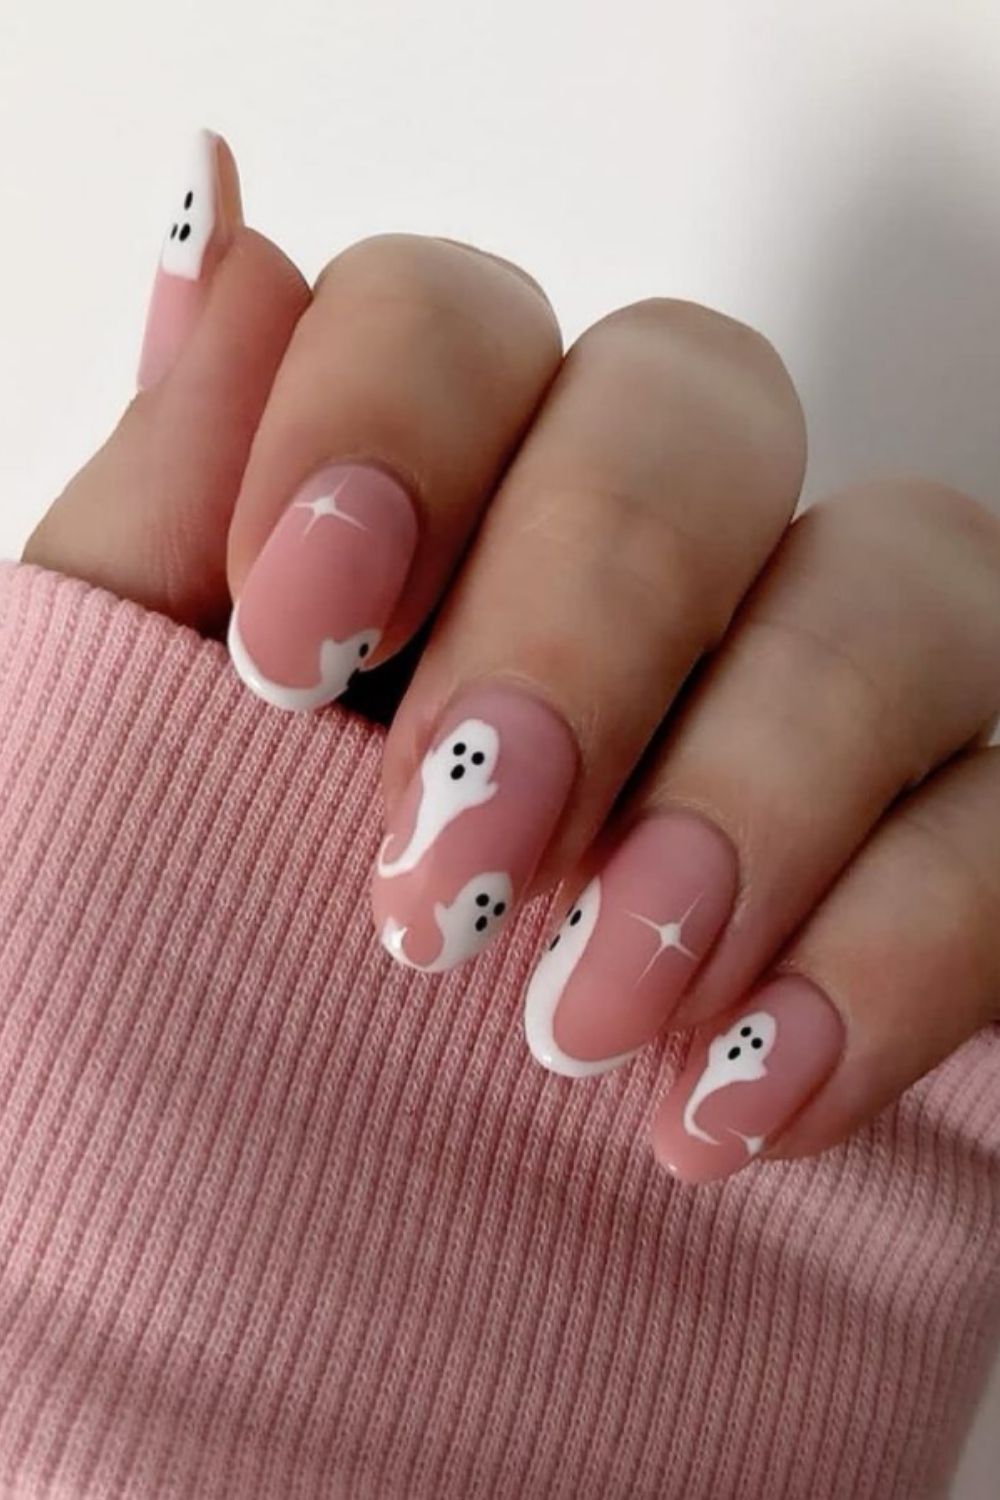 Pink and white Halloween nail art designs